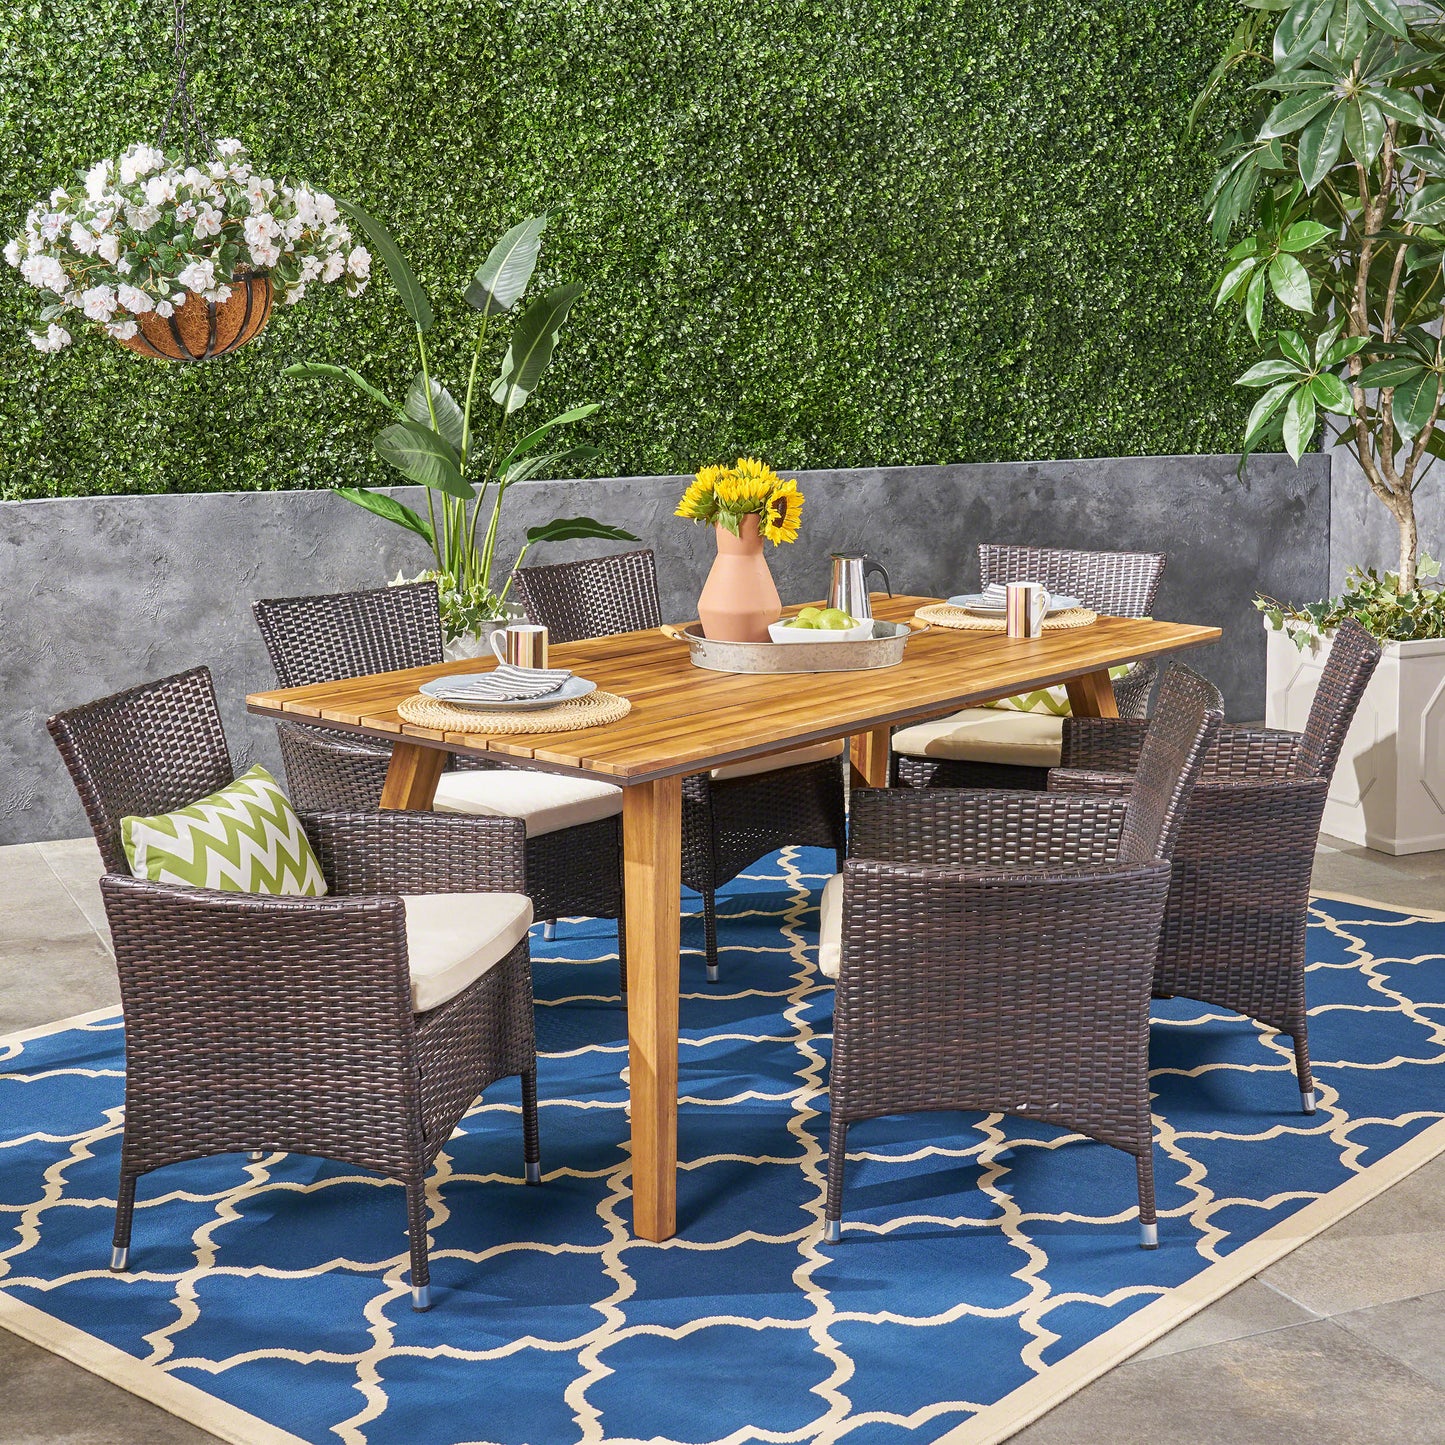 Ella Outdoor 7 Piece Acacia Wood Dining Set with Wicker Chairs, Teak and Multi Brown and Beige